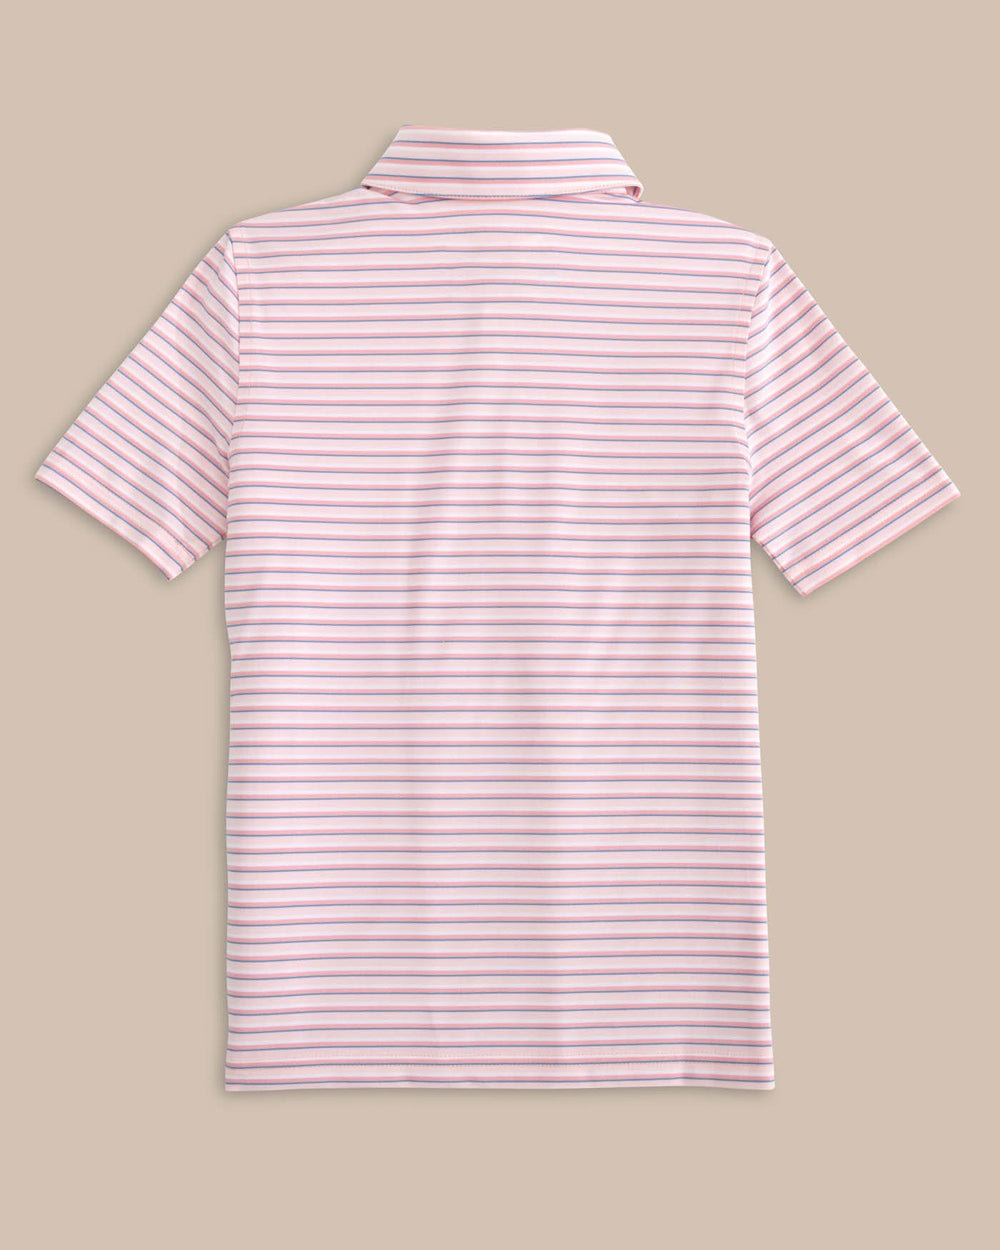 The back view of the Southern Tide Boys Driver Carova Stripe Polo Shirt by Southern Tide - Light Pink